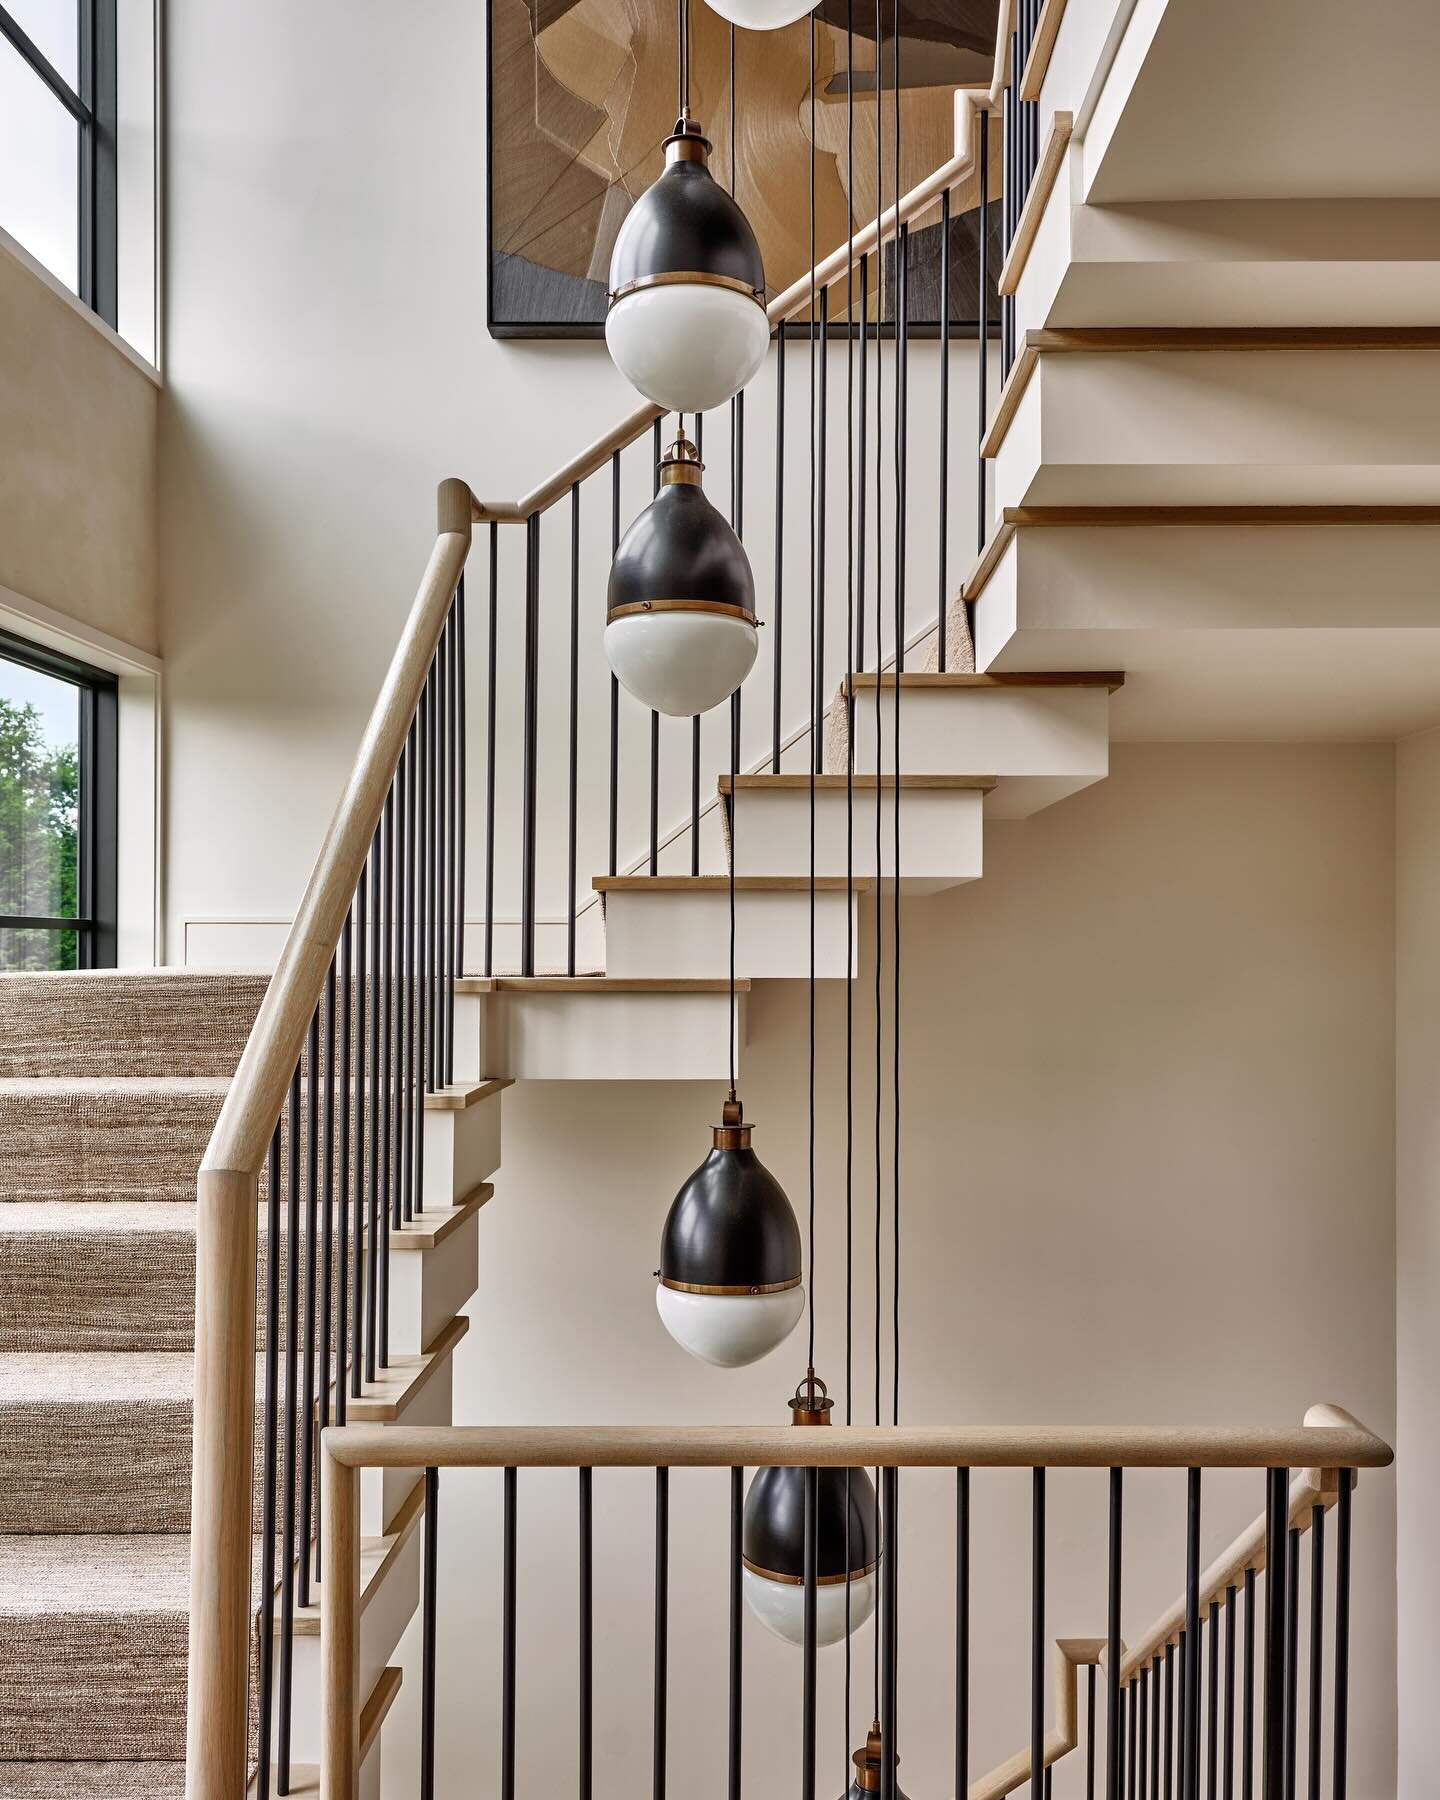 One of our favorite parts of the design process is interpreting a clients inspiration and bringing it to life! ✨This three-story stair tower at #CoveHouse for example was one of the first design intentions that helped dictate the direction of the res